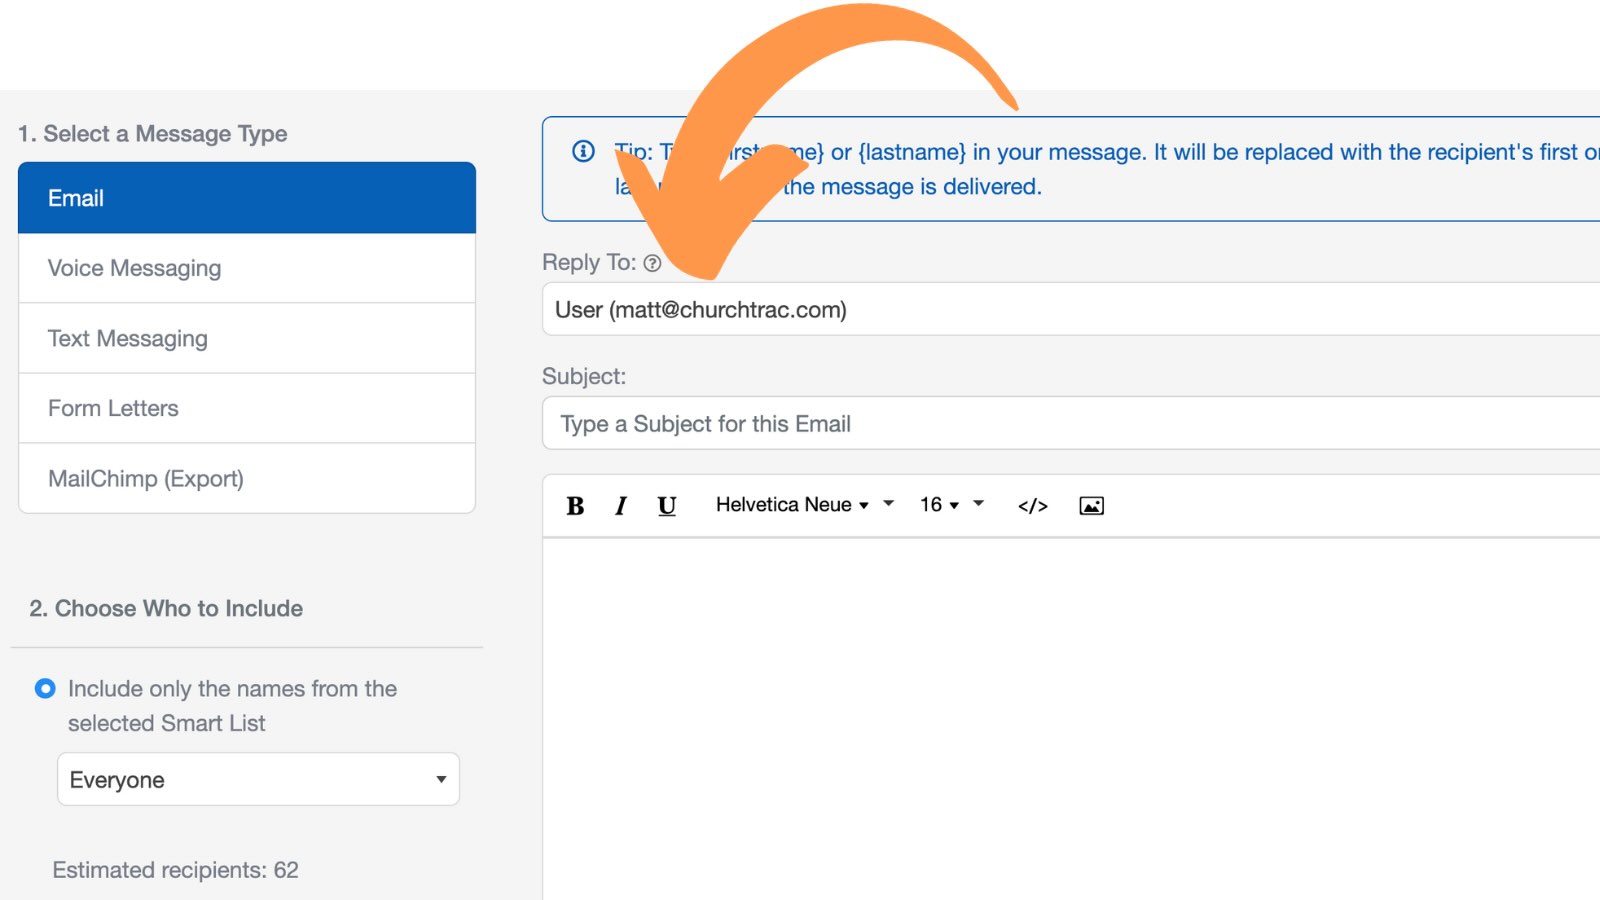 How to enable and use ChurchTrac Mail for mass email at your church